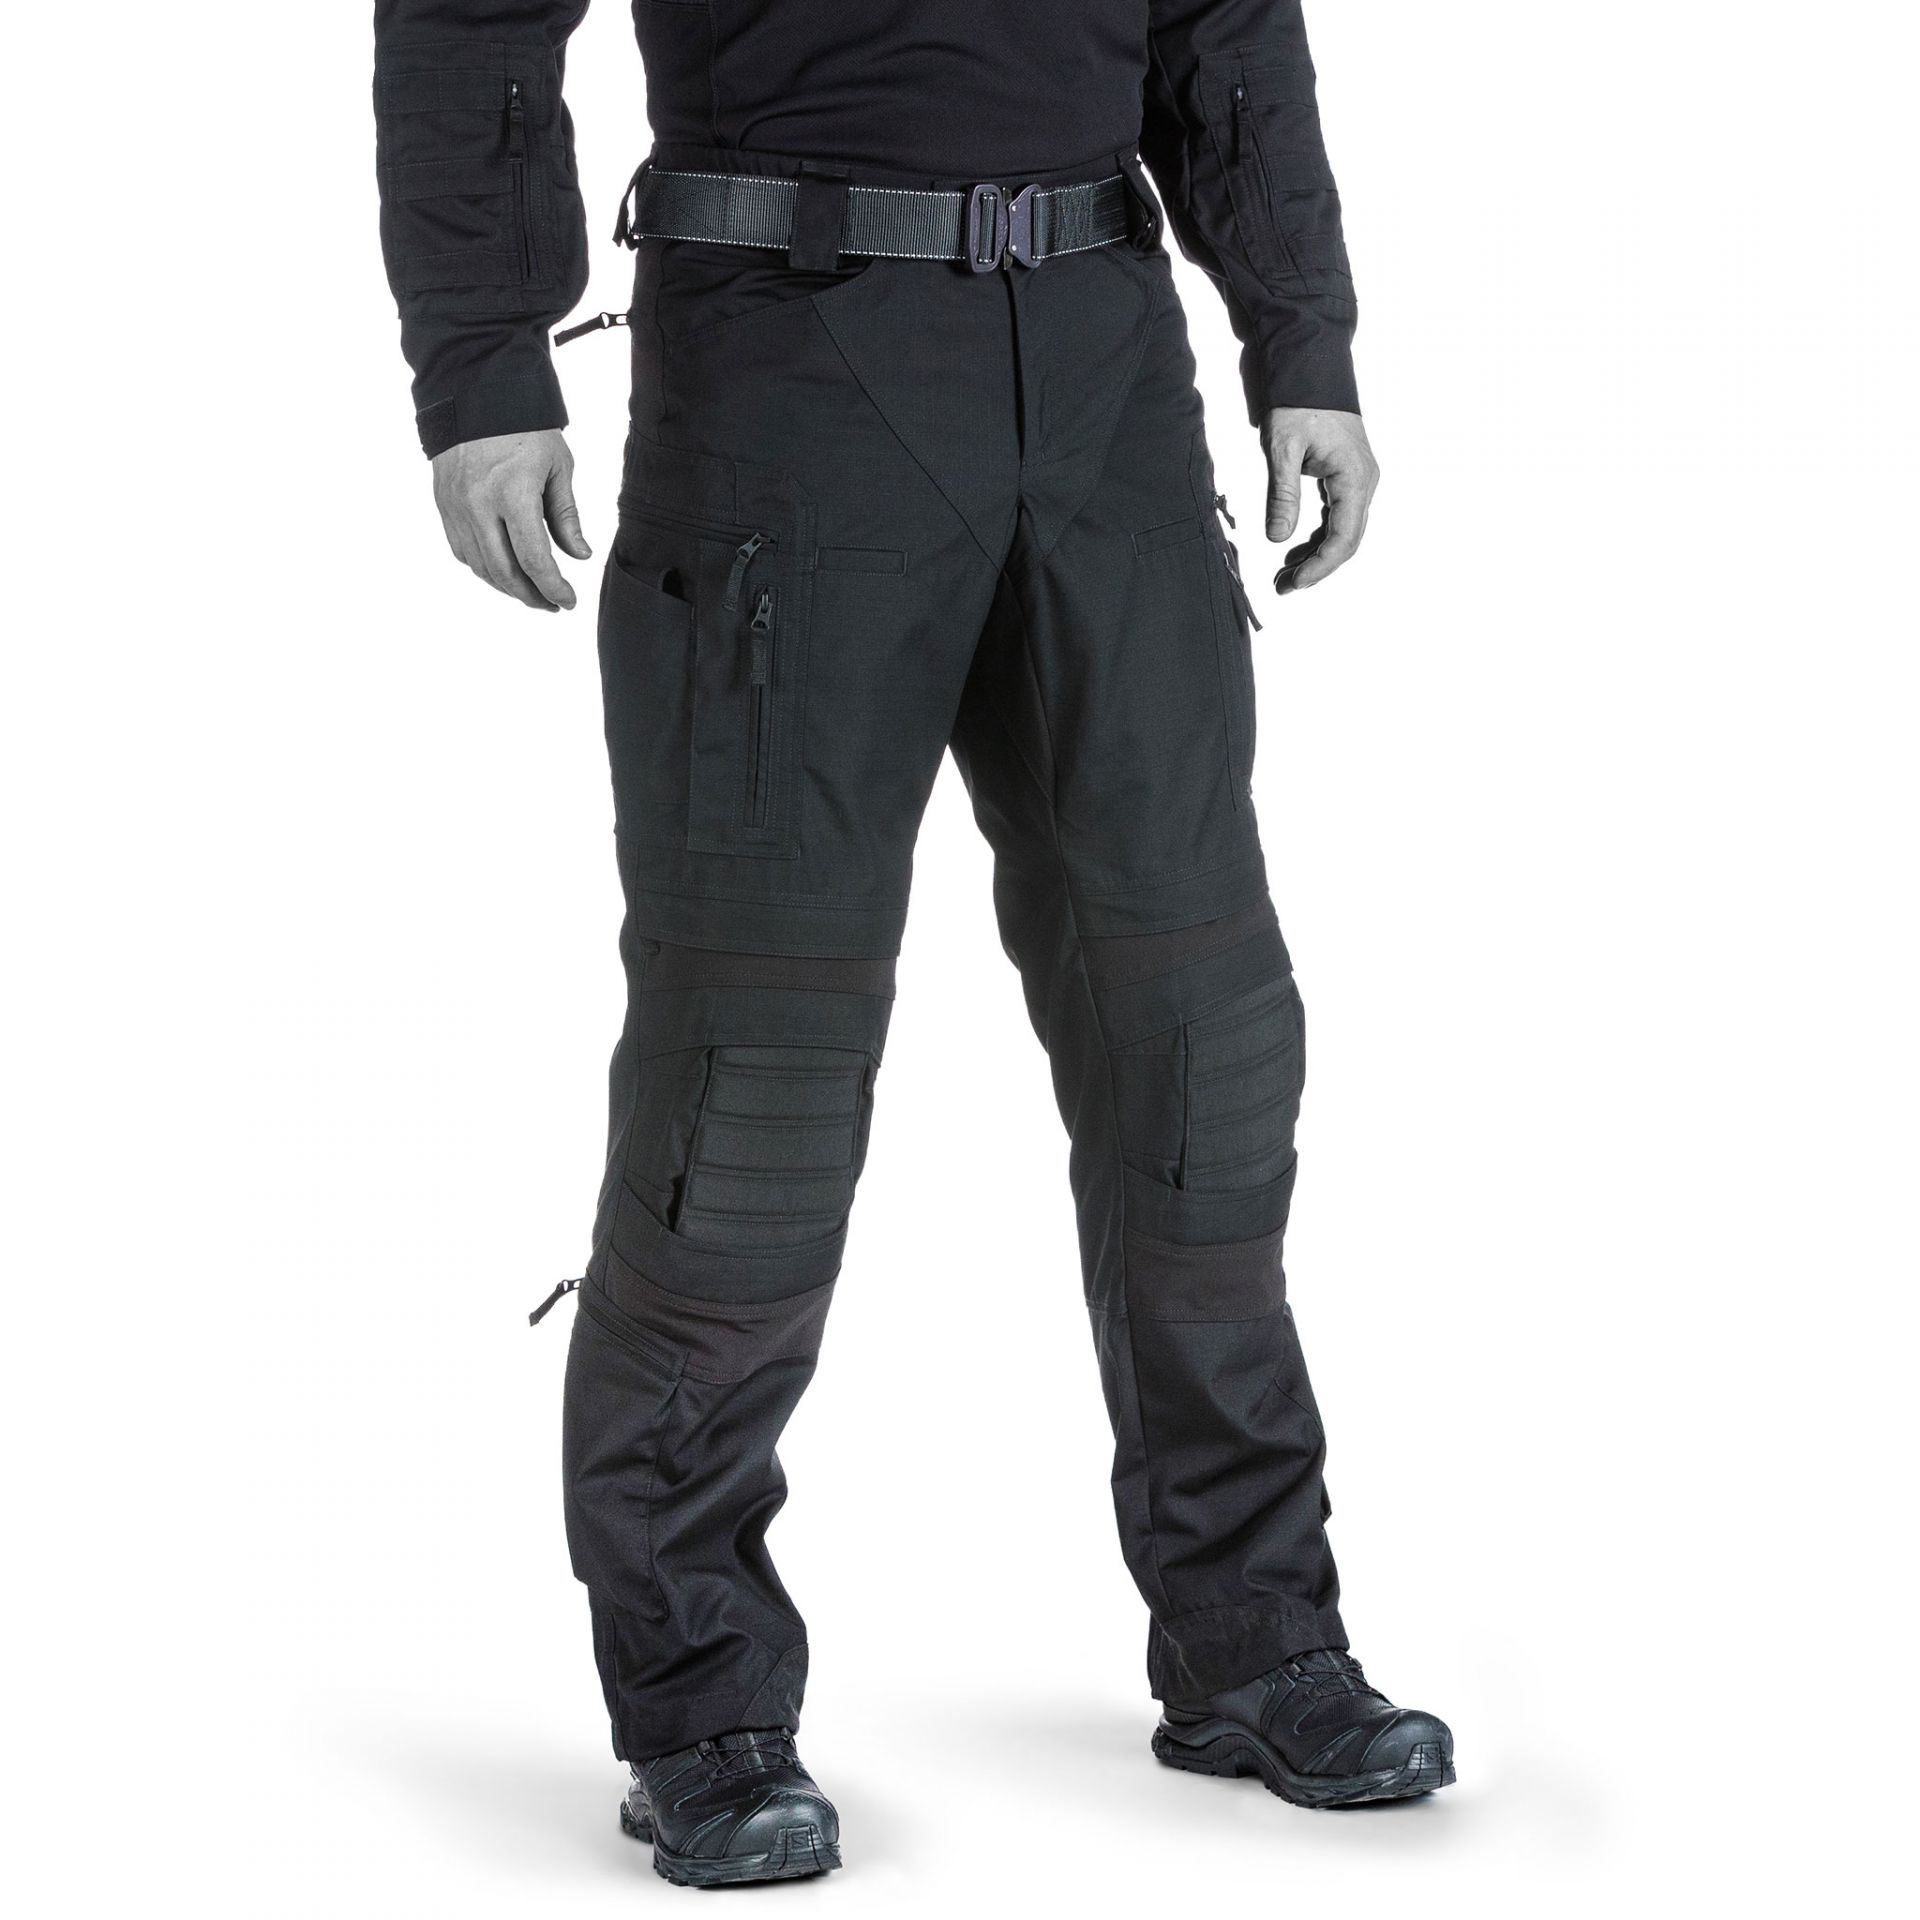 Combat Trousers With Knee Pads “Grom”